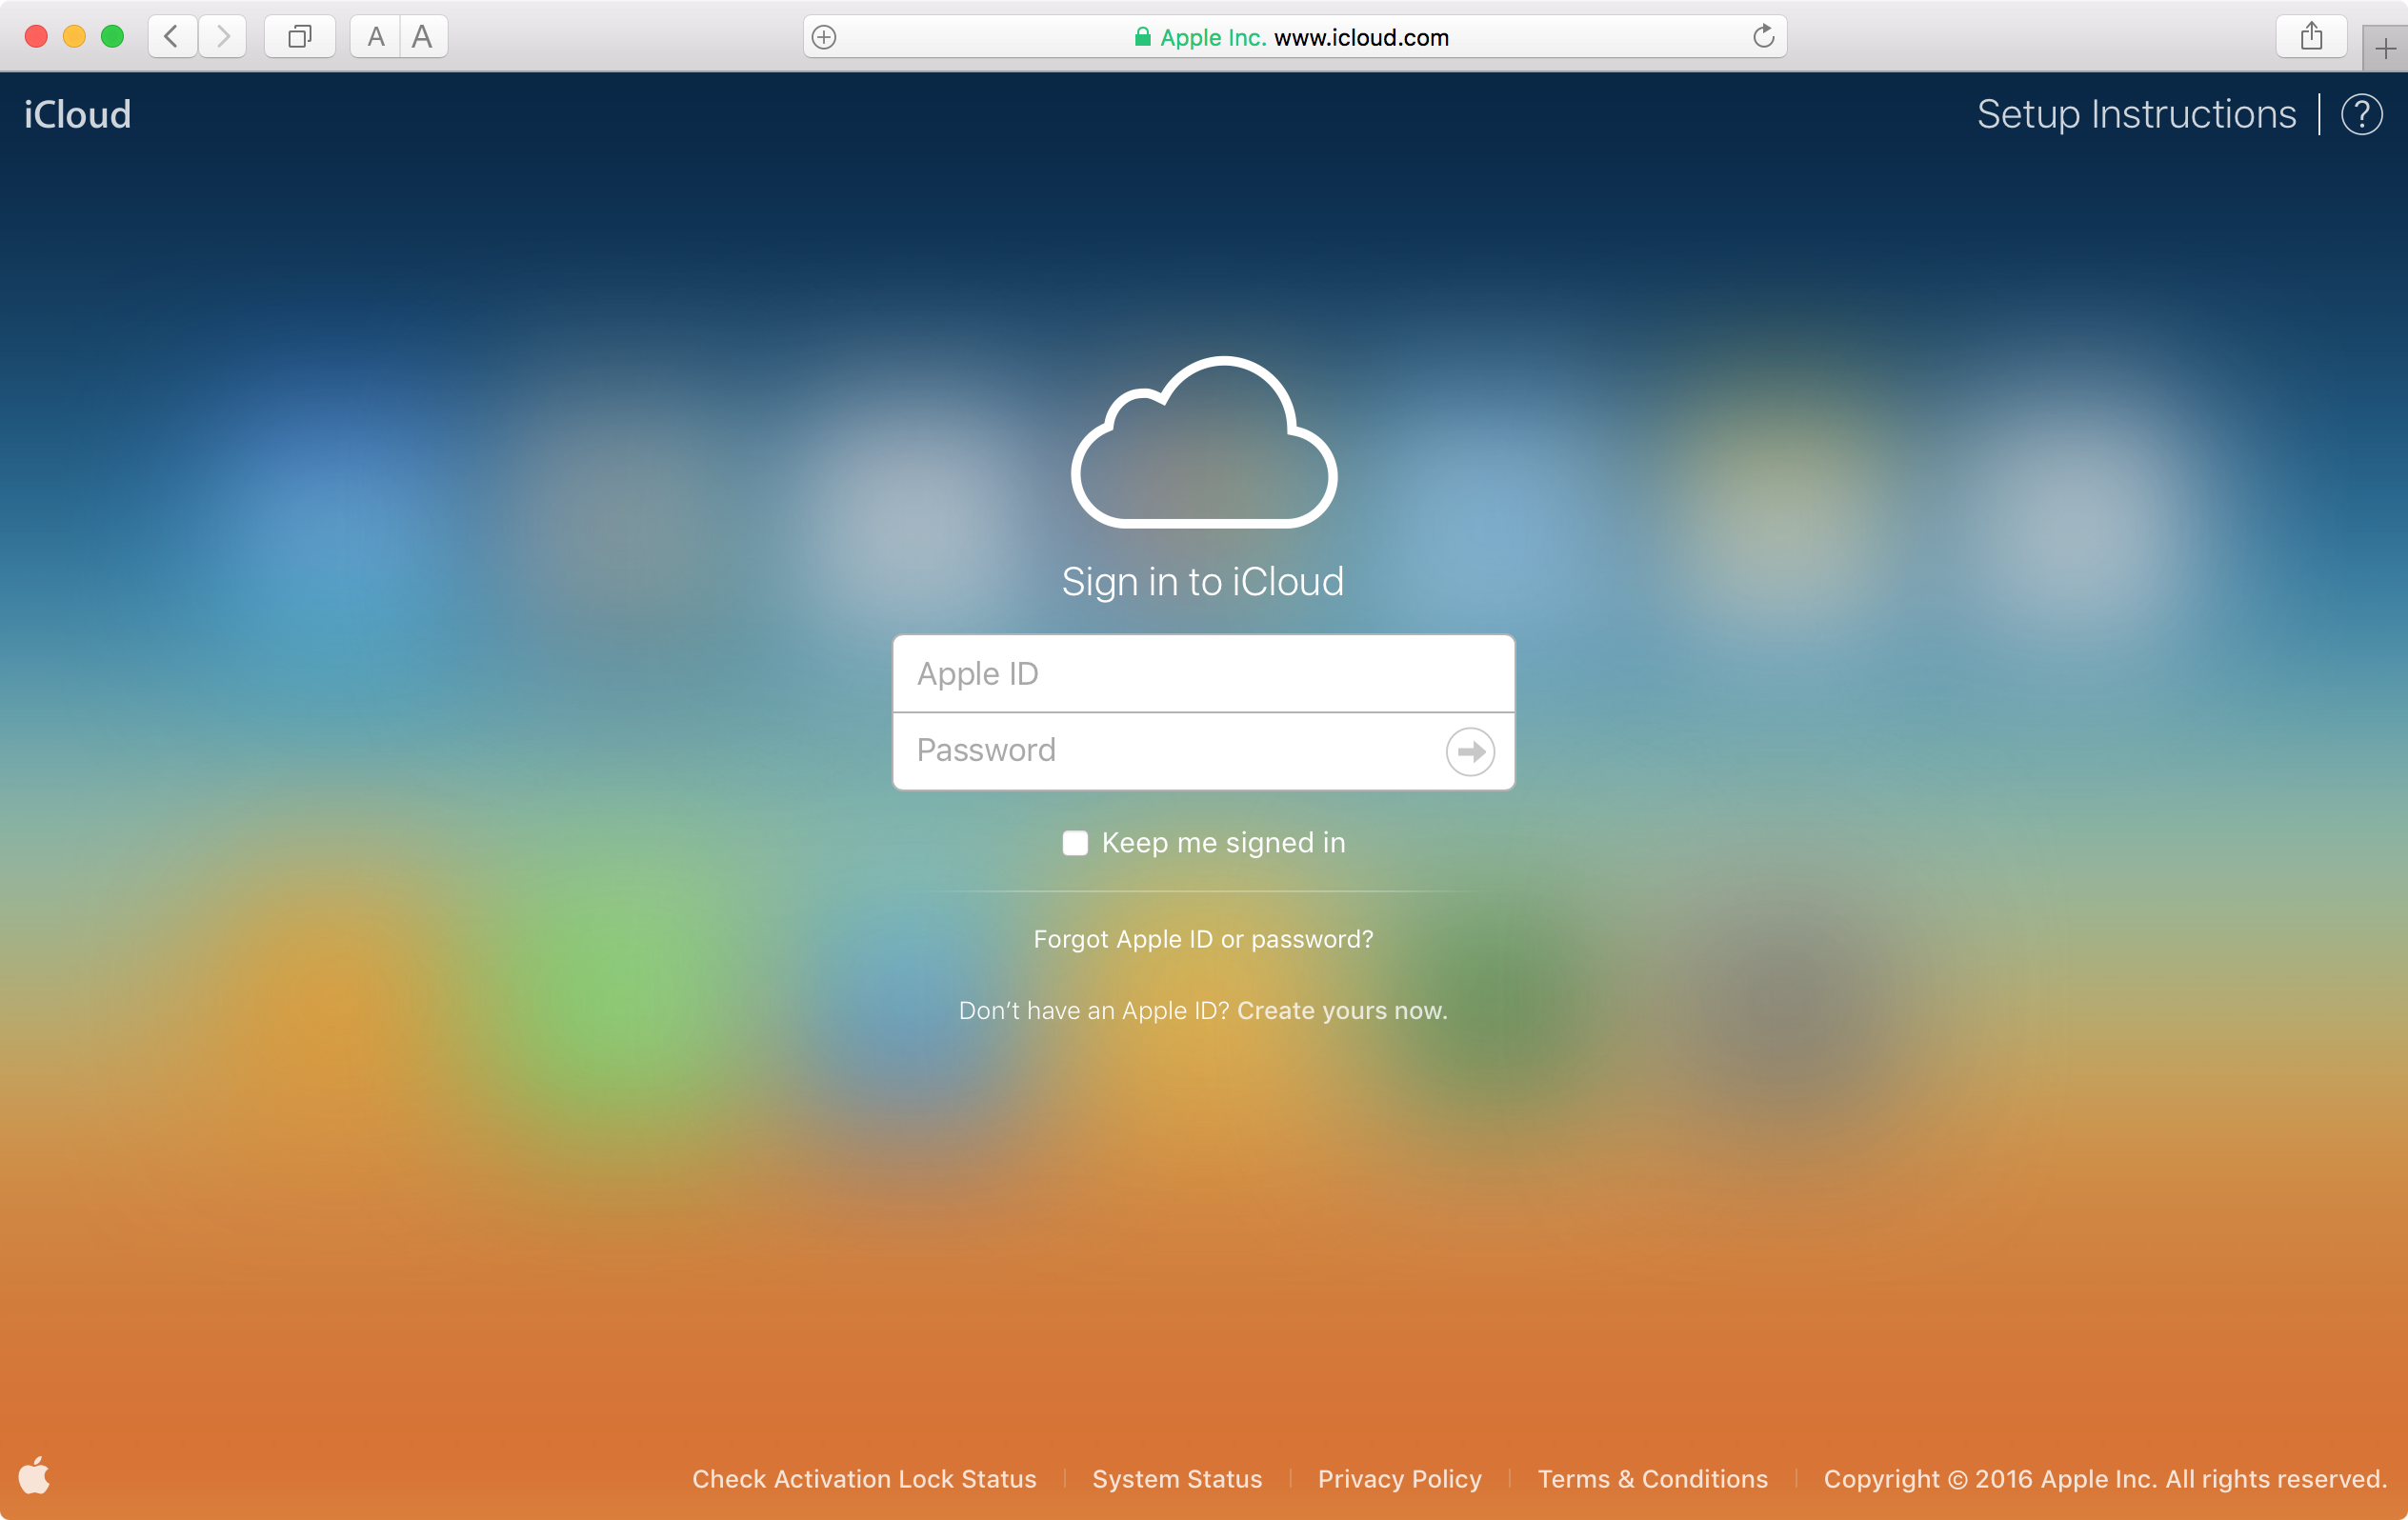 How to recover data from iCloud